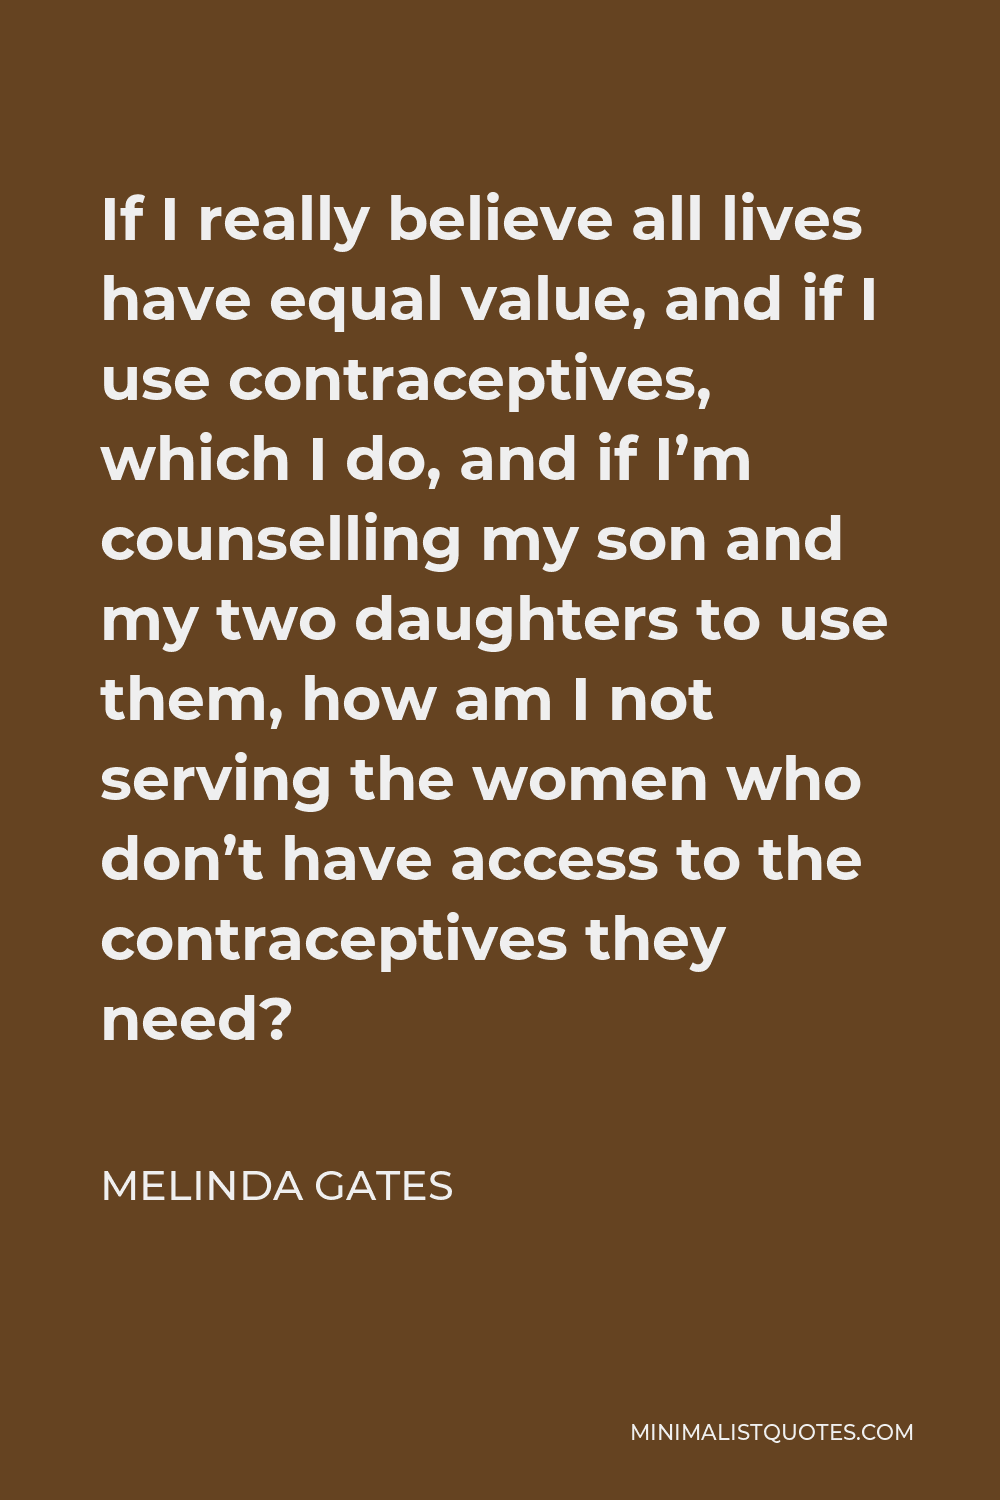 Melinda Gates Quote - If I really believe all lives have equal value, and if I use contraceptives, which I do, and if I’m counselling my son and my two daughters to use them, how am I not serving the women who don’t have access to the contraceptives they need?